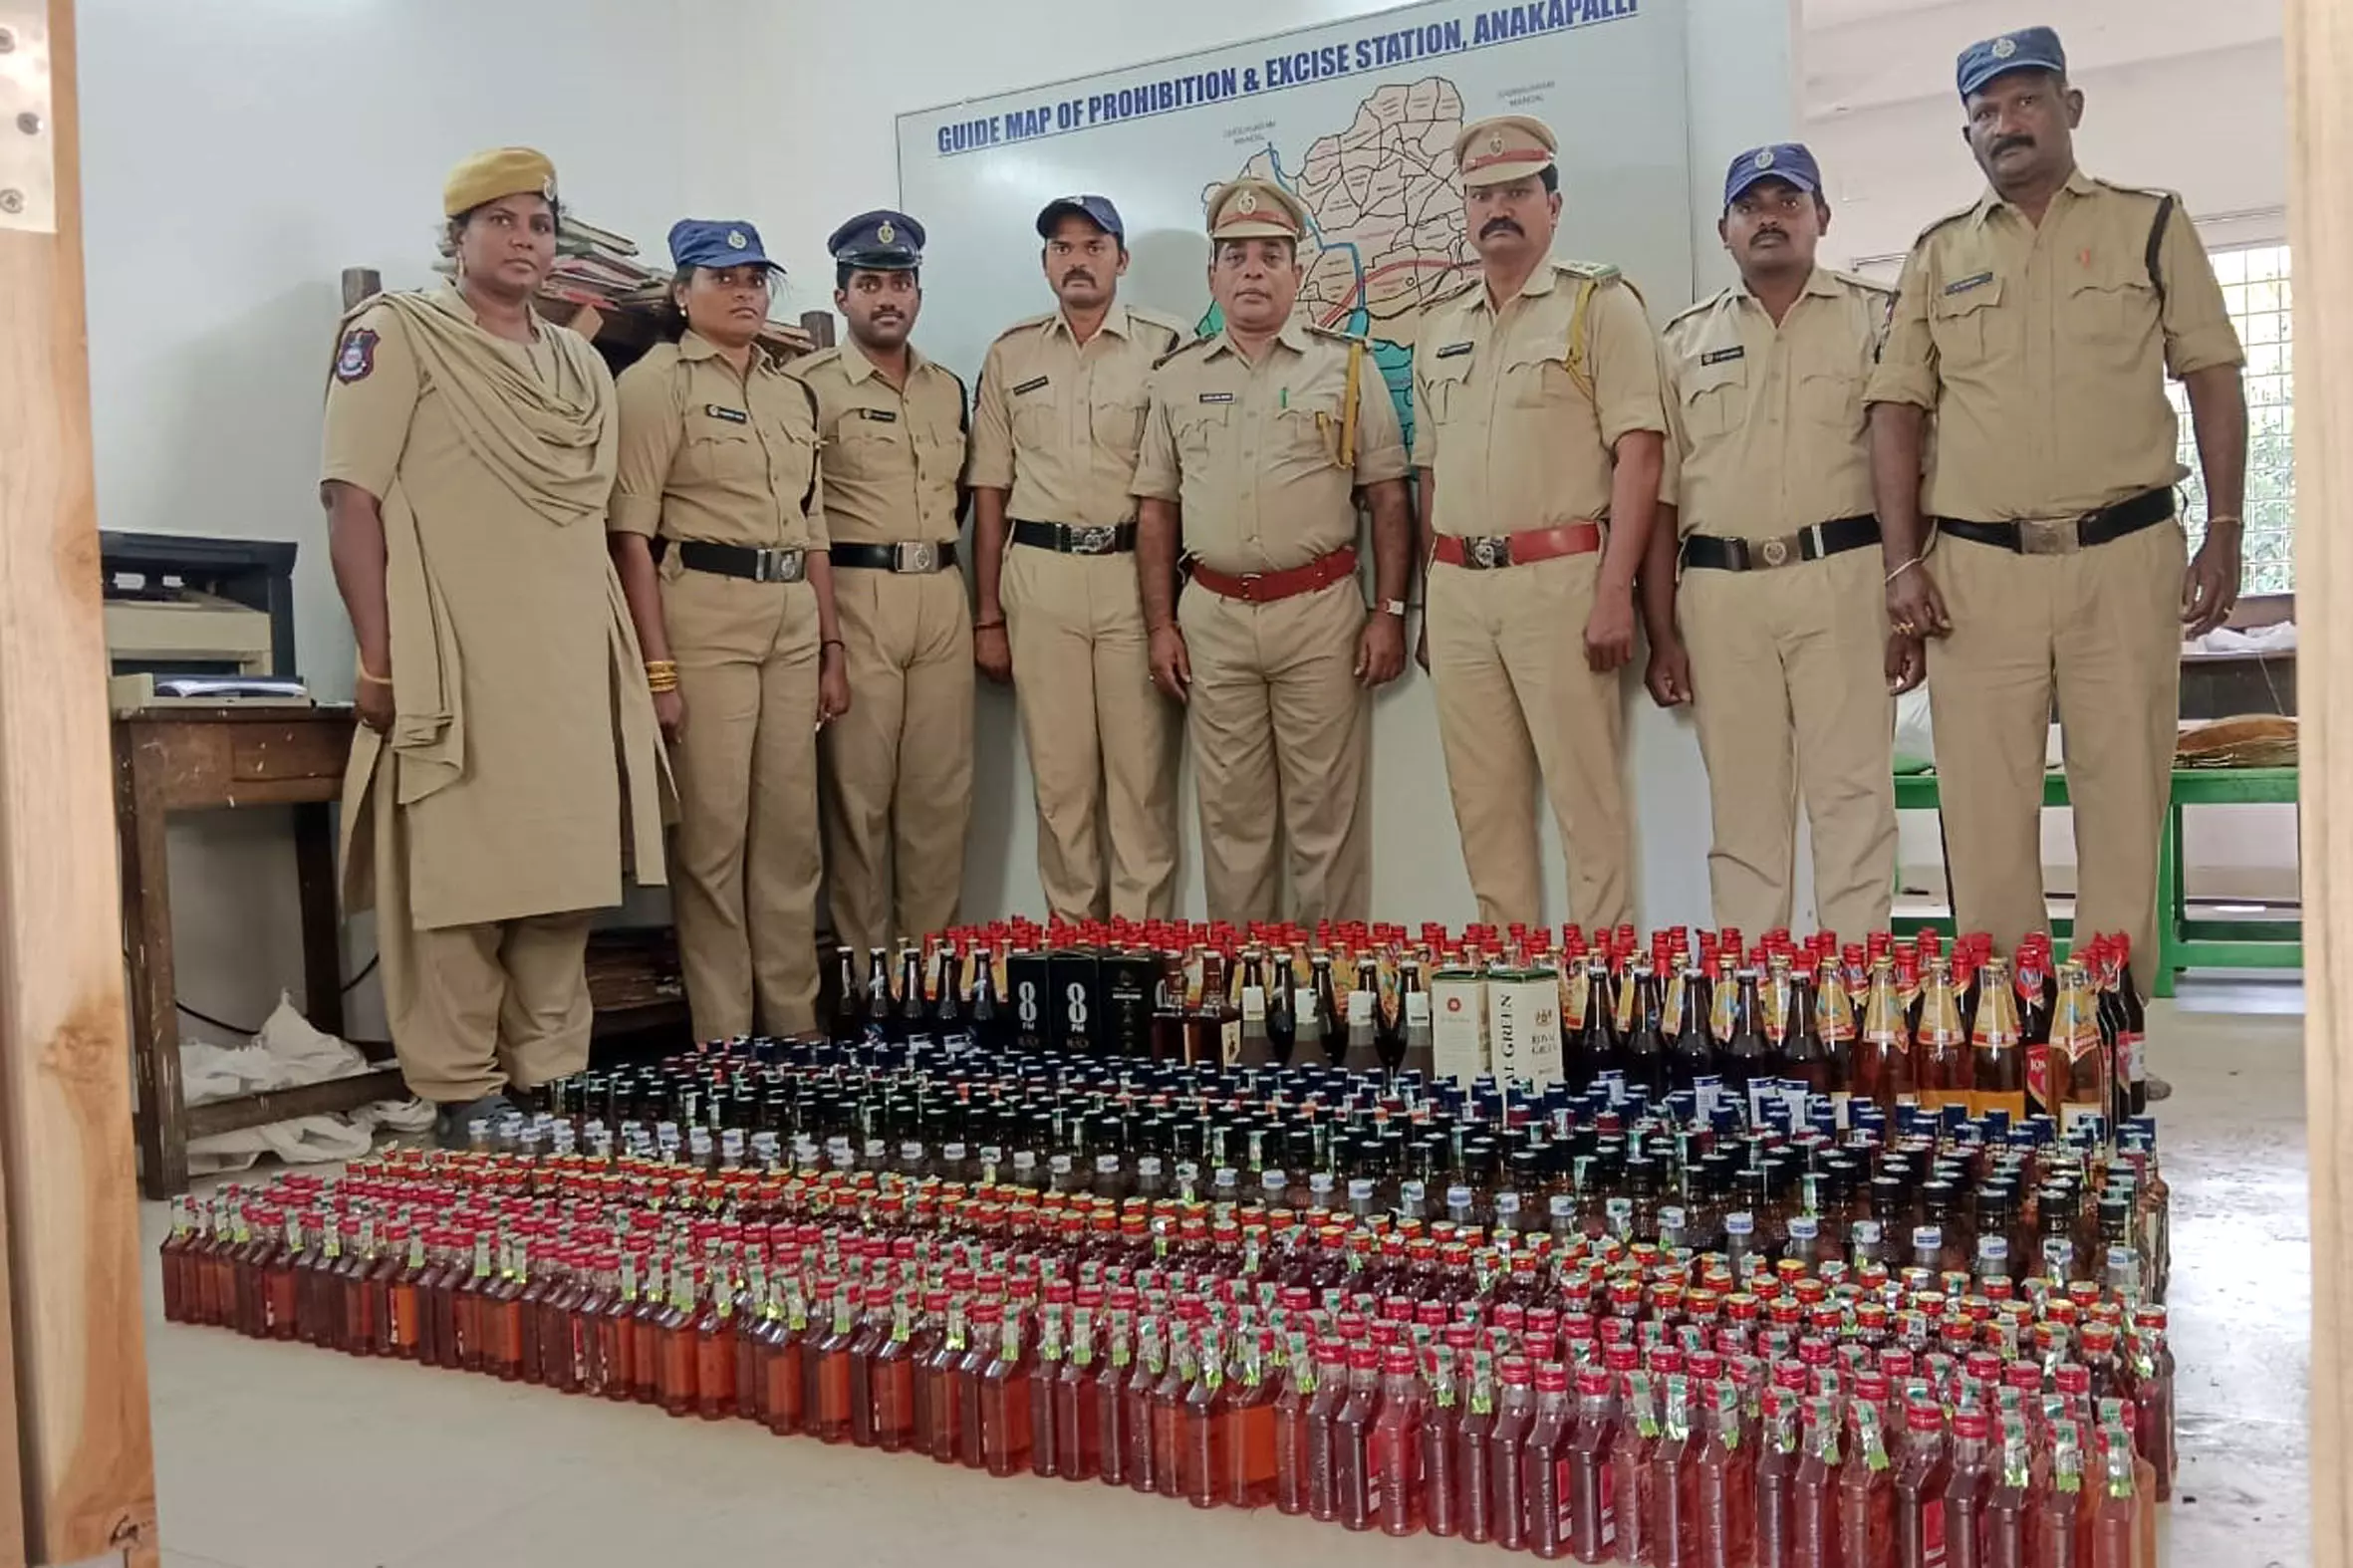 Liquor bottles worth Rs 1,75,000 seized in Anakapalle